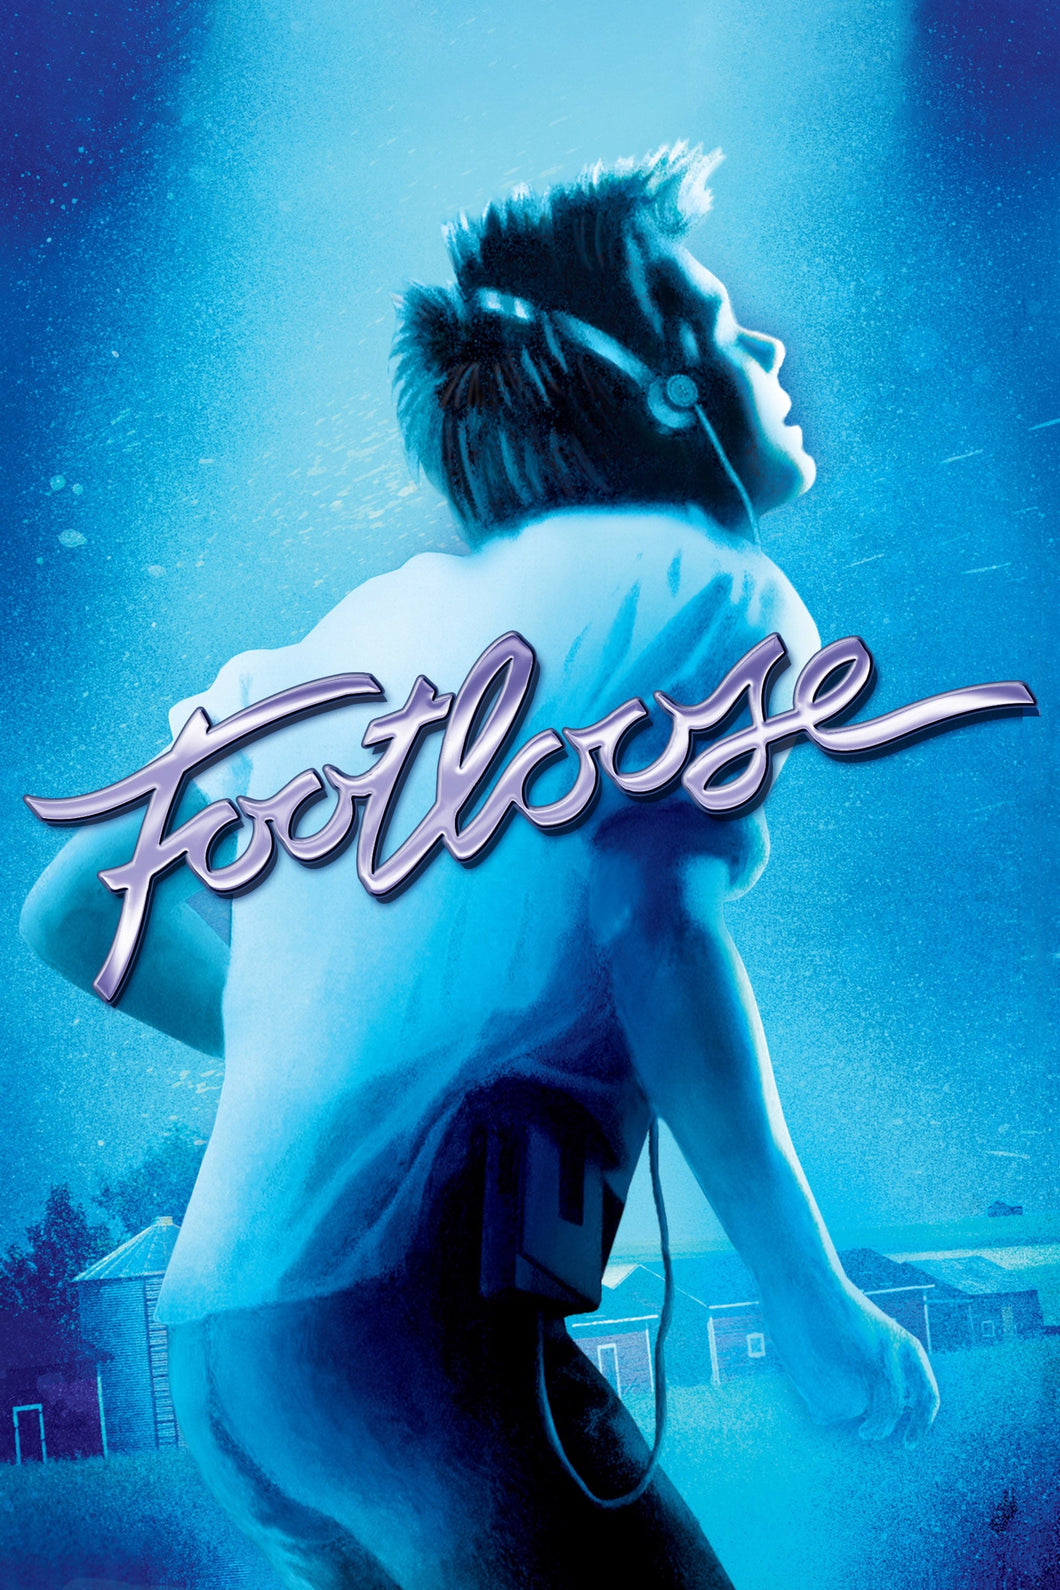 Footloose (1984) Movie Poster High Quality Glossy Paper A1 A2 A3 A4 A3 Framed or Unframed!!!